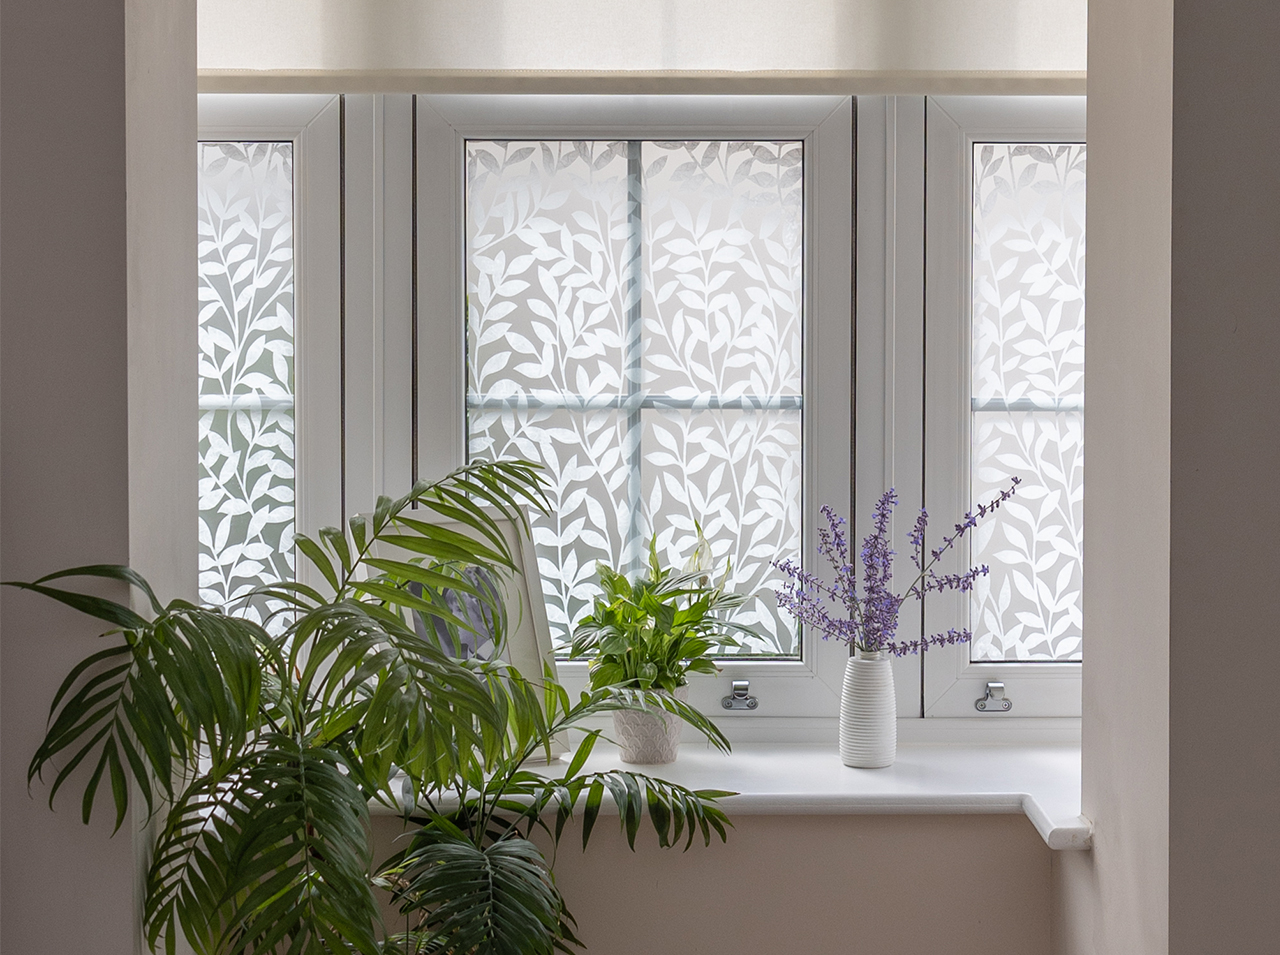 Window covered with opaque window film with white plant contours.